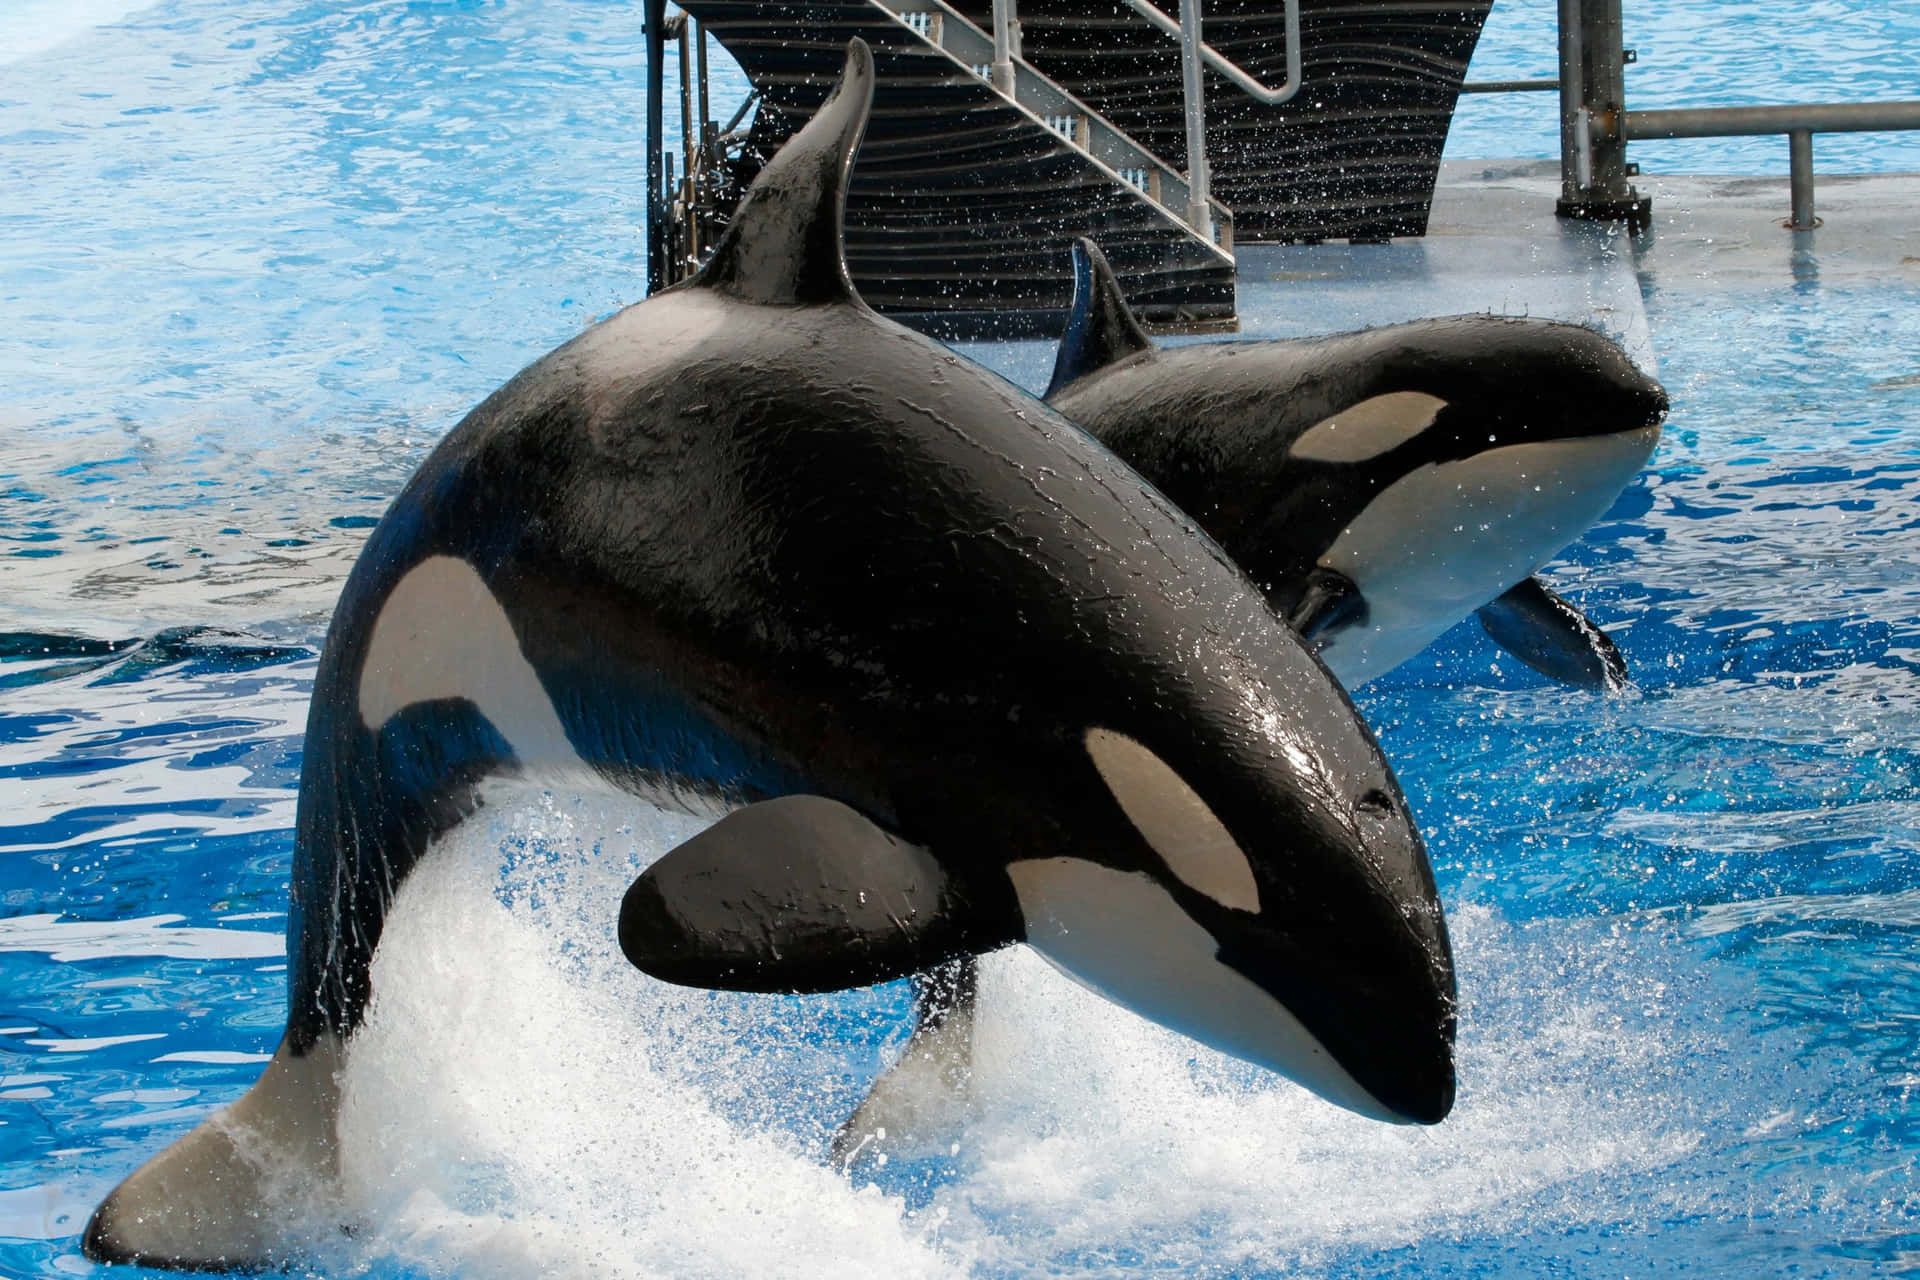 Two Cute Killer Whale Picture